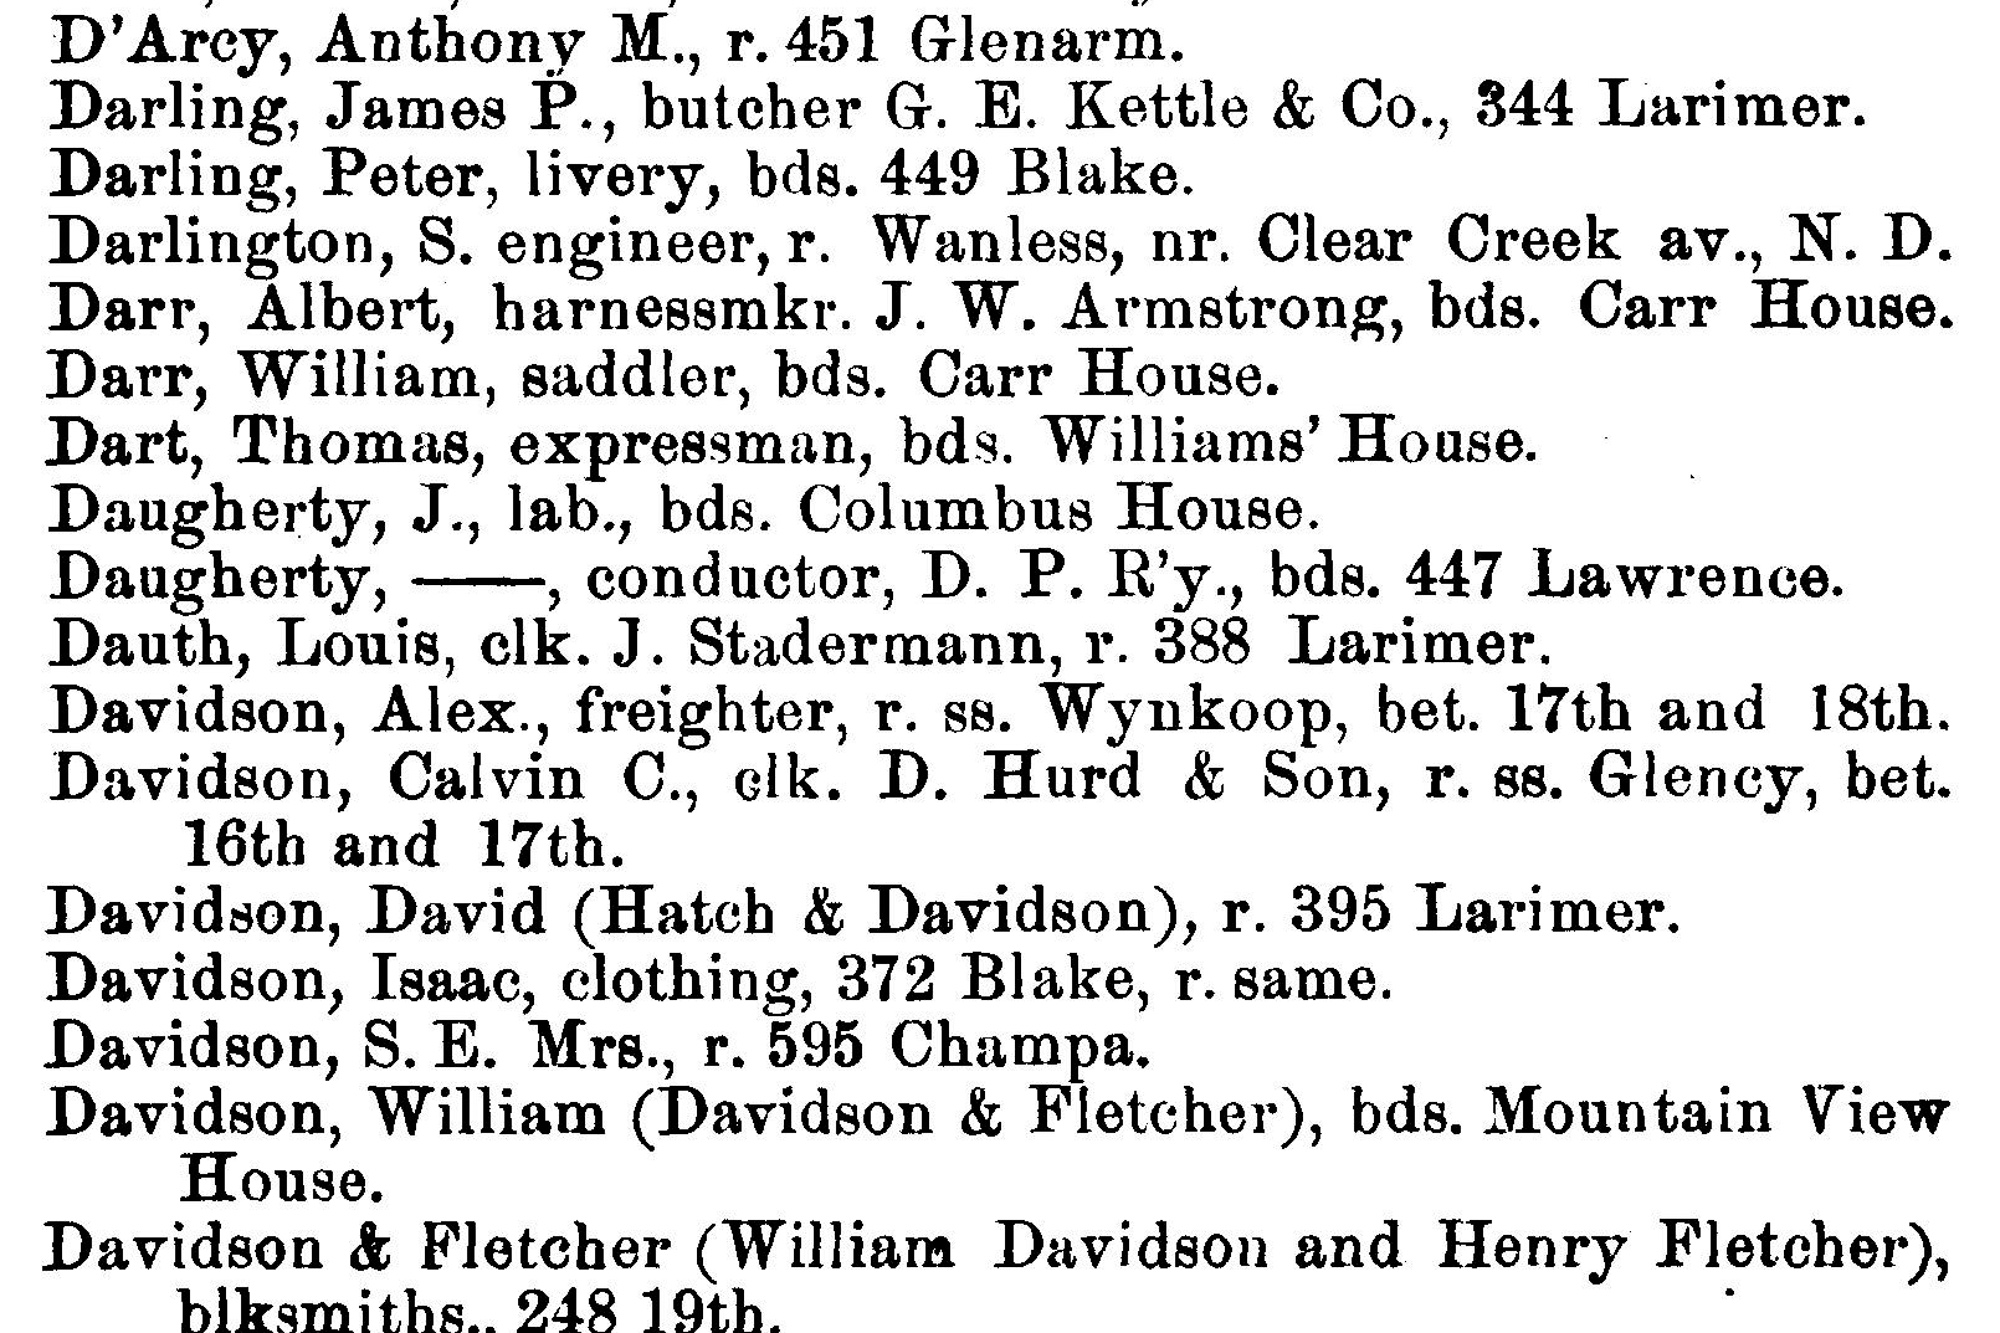 Dauth Family Archive - 1874 - Denver Directory - Entry for Louis Dauth